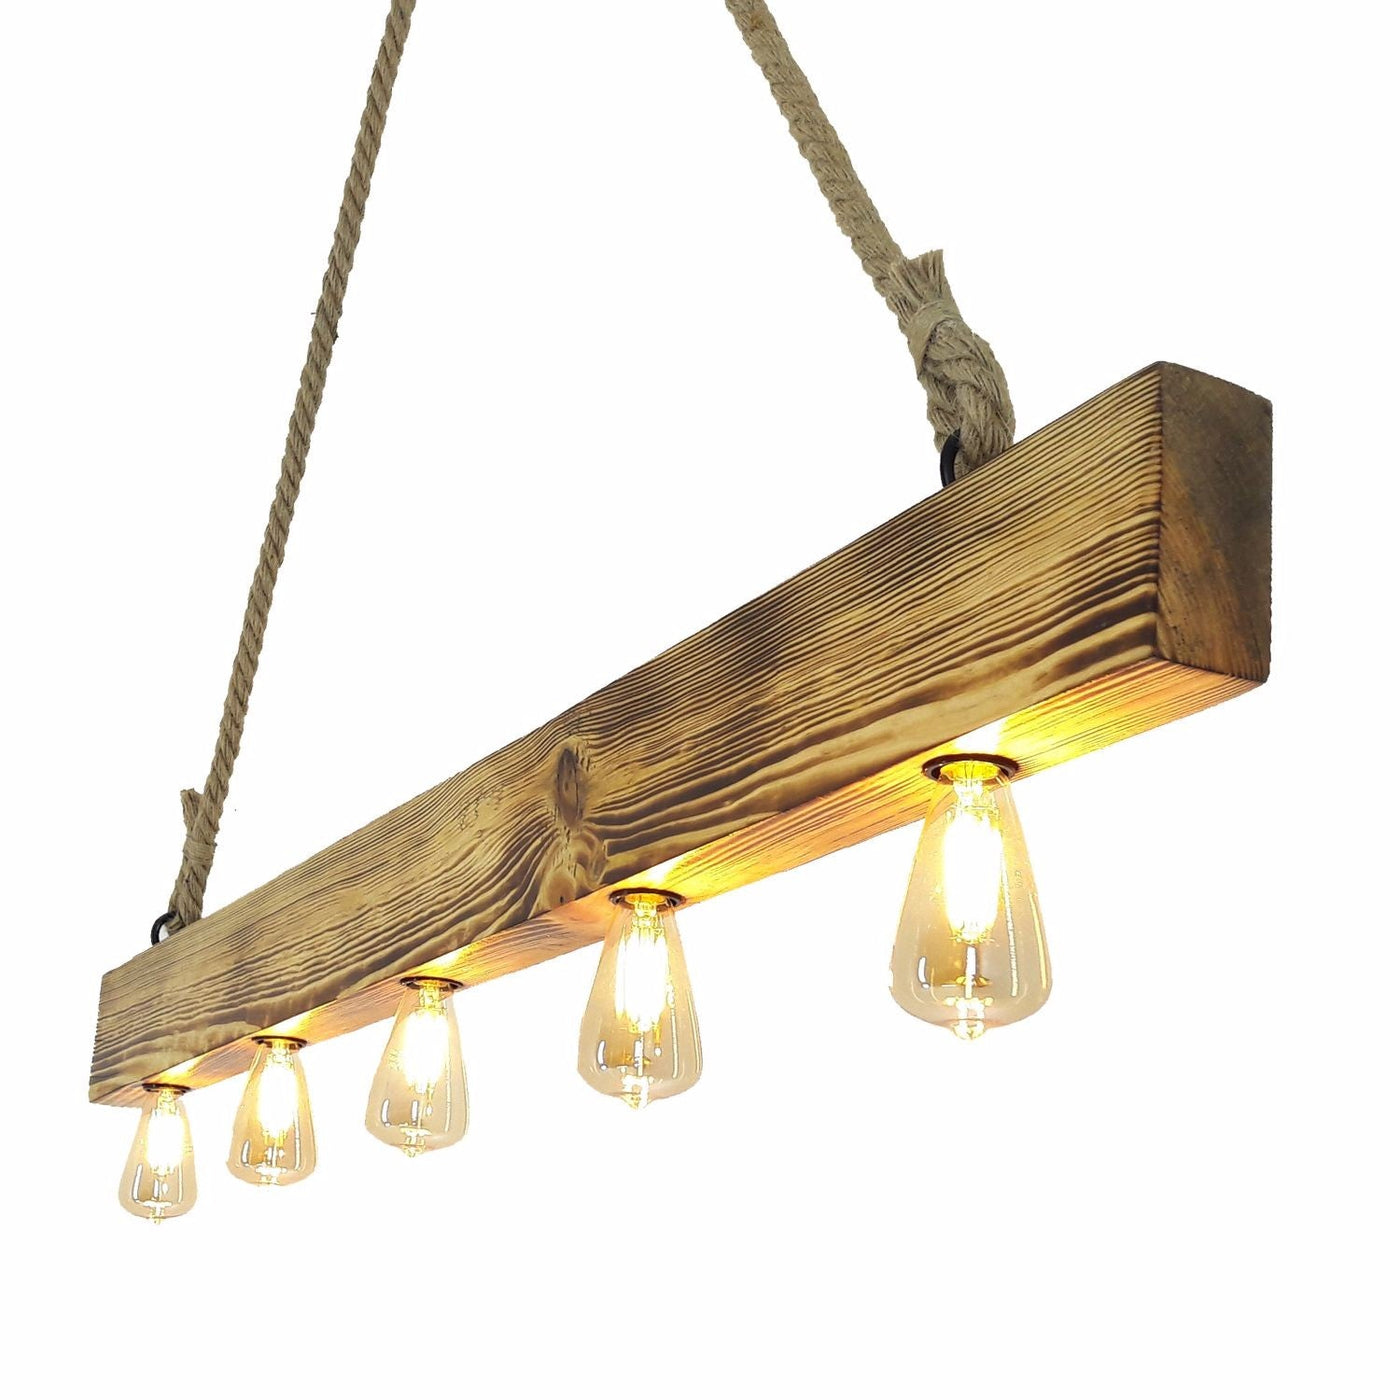 HT140 | Industrial Wood Pendant Light, Industrial & Retro - Rope Hanglamp with Wood Block | 5xE27 Bulbs